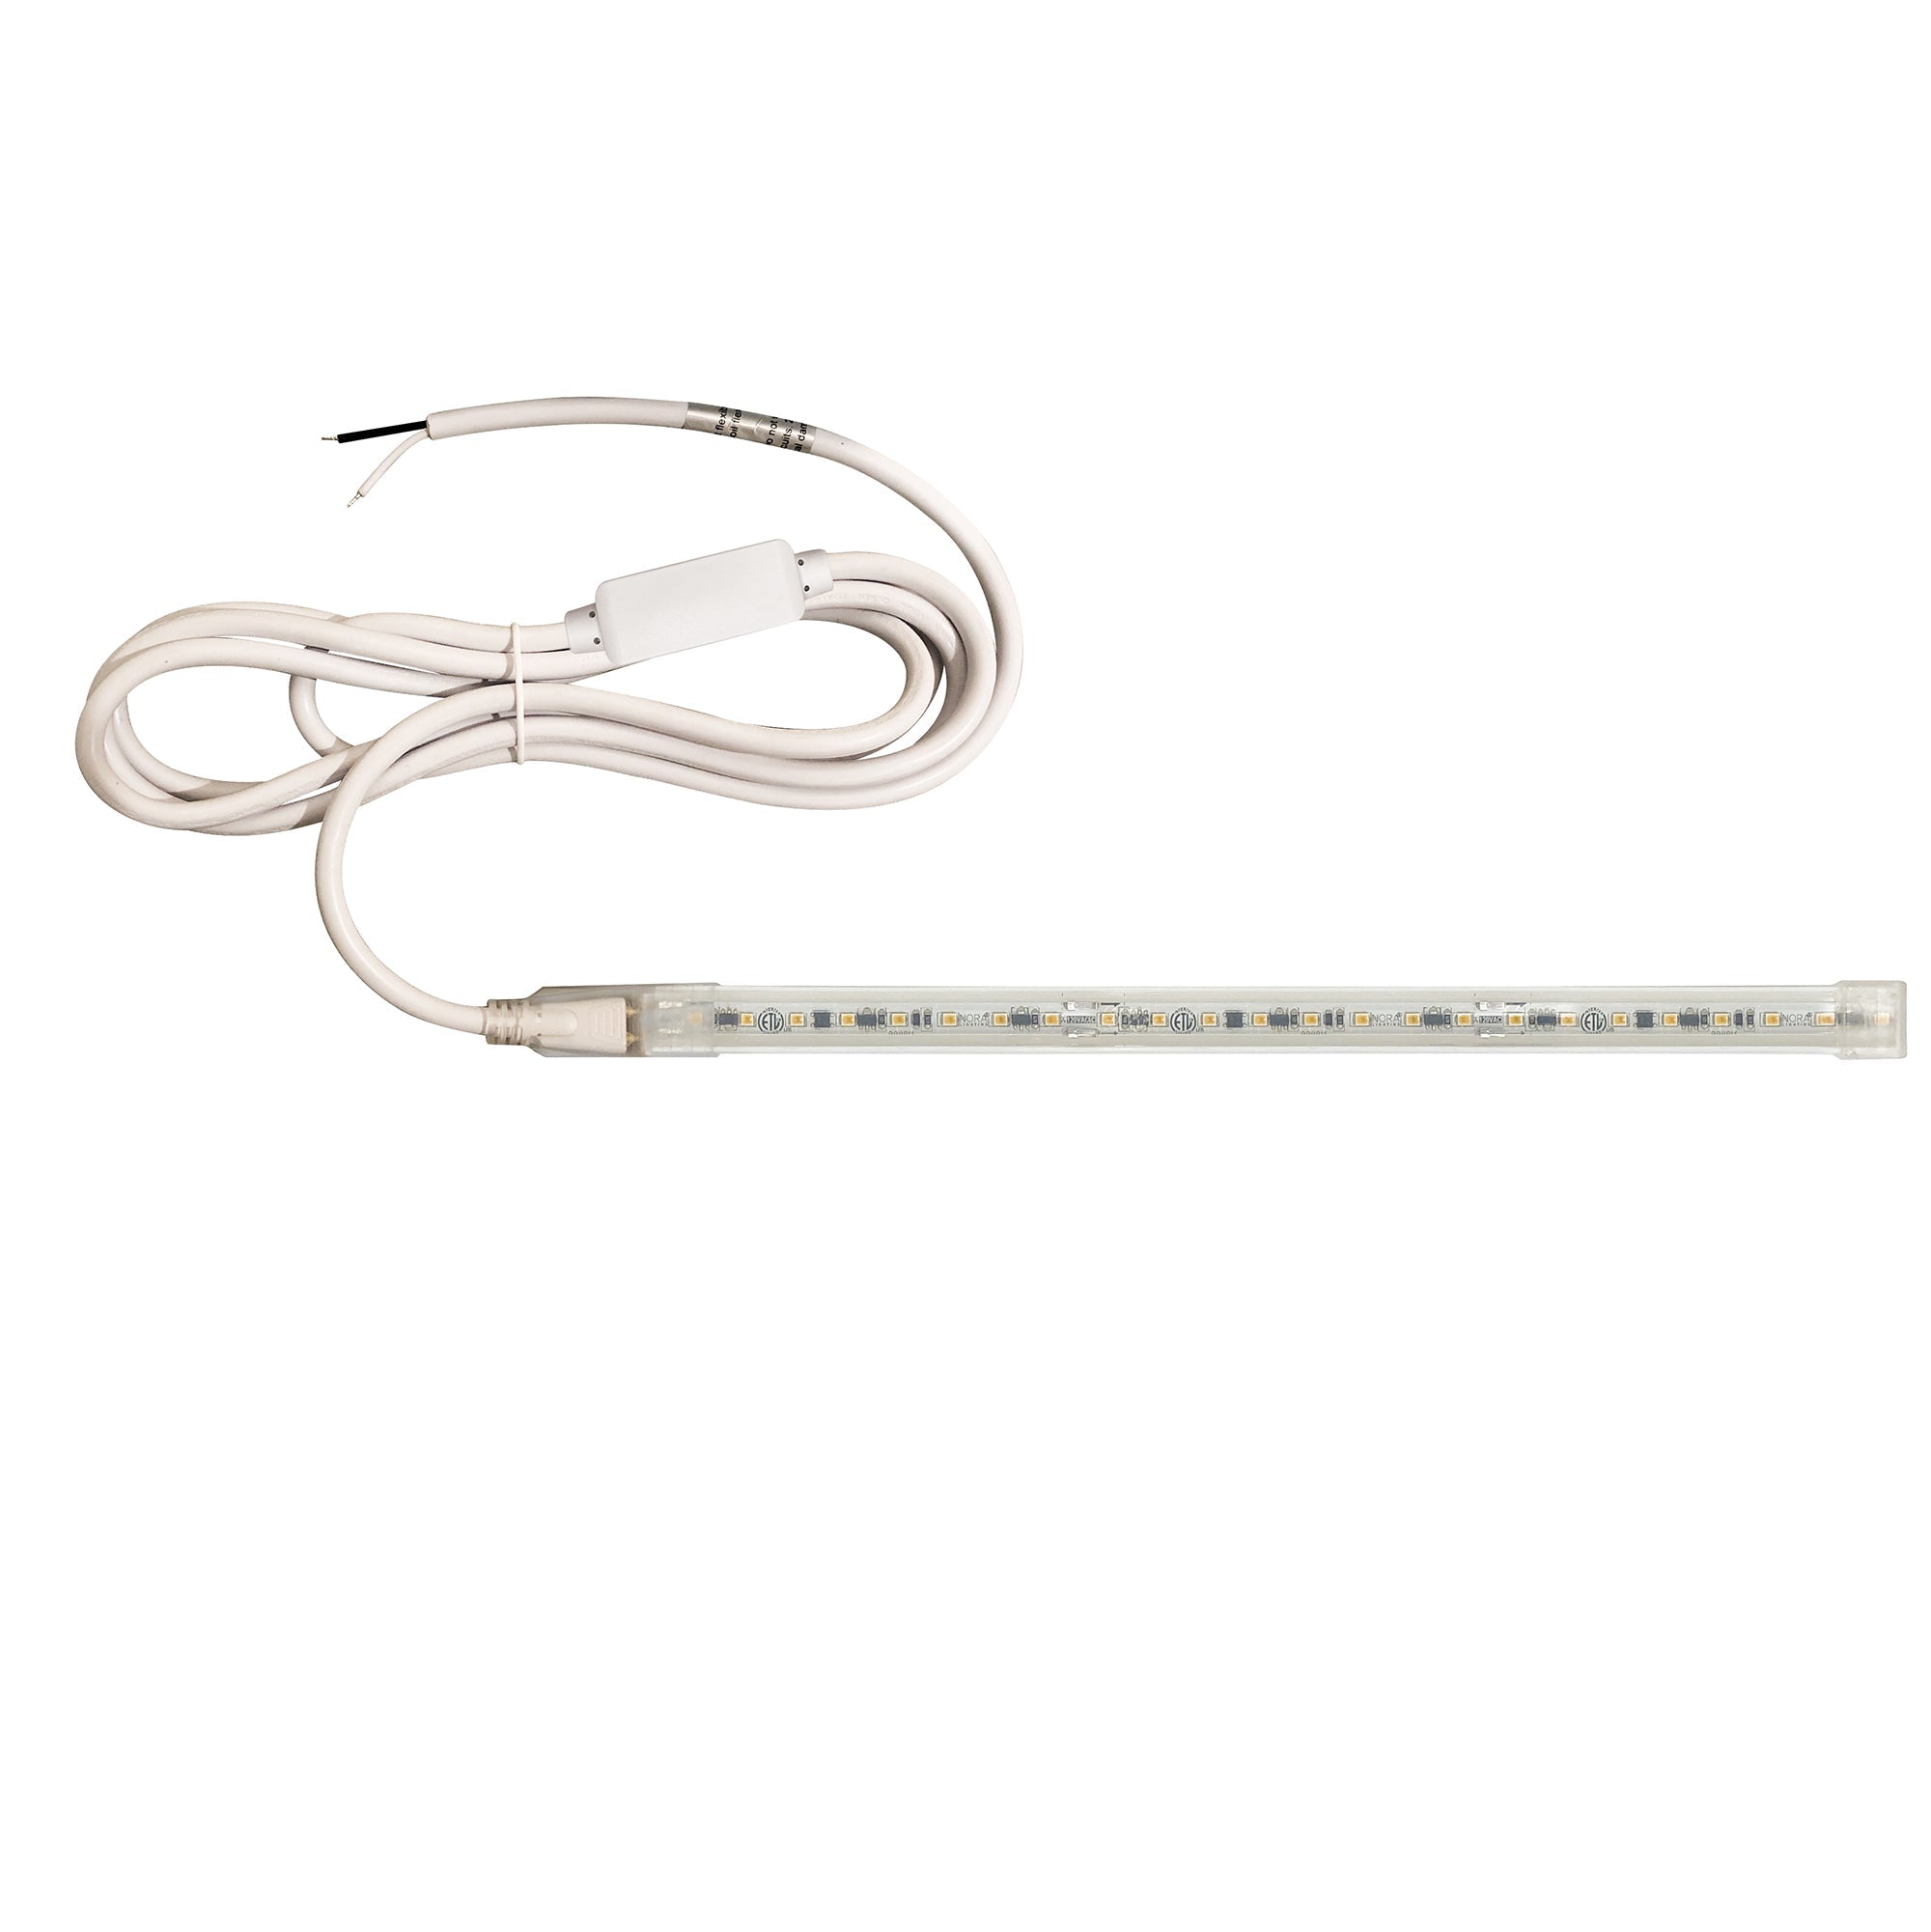 Nora Lighting NUTP13-W49-12-940/HWSP - Accent / Undercabinet - Custom Cut 49-ft 120V Continuous LED Tape Light, 330lm / 3.6W per foot, 4000K, w/ Mounting Clips and 8' Hardwired Power Cord w/ Surge Protector